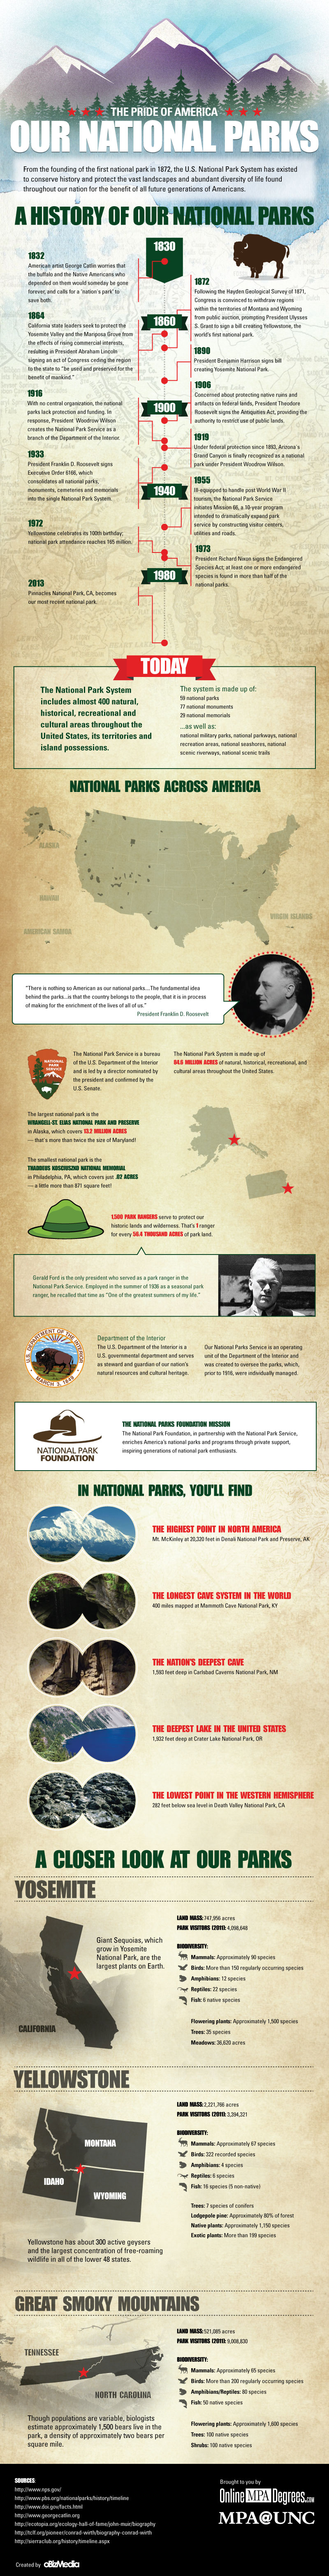 John Muir Inventions and Accomplishments